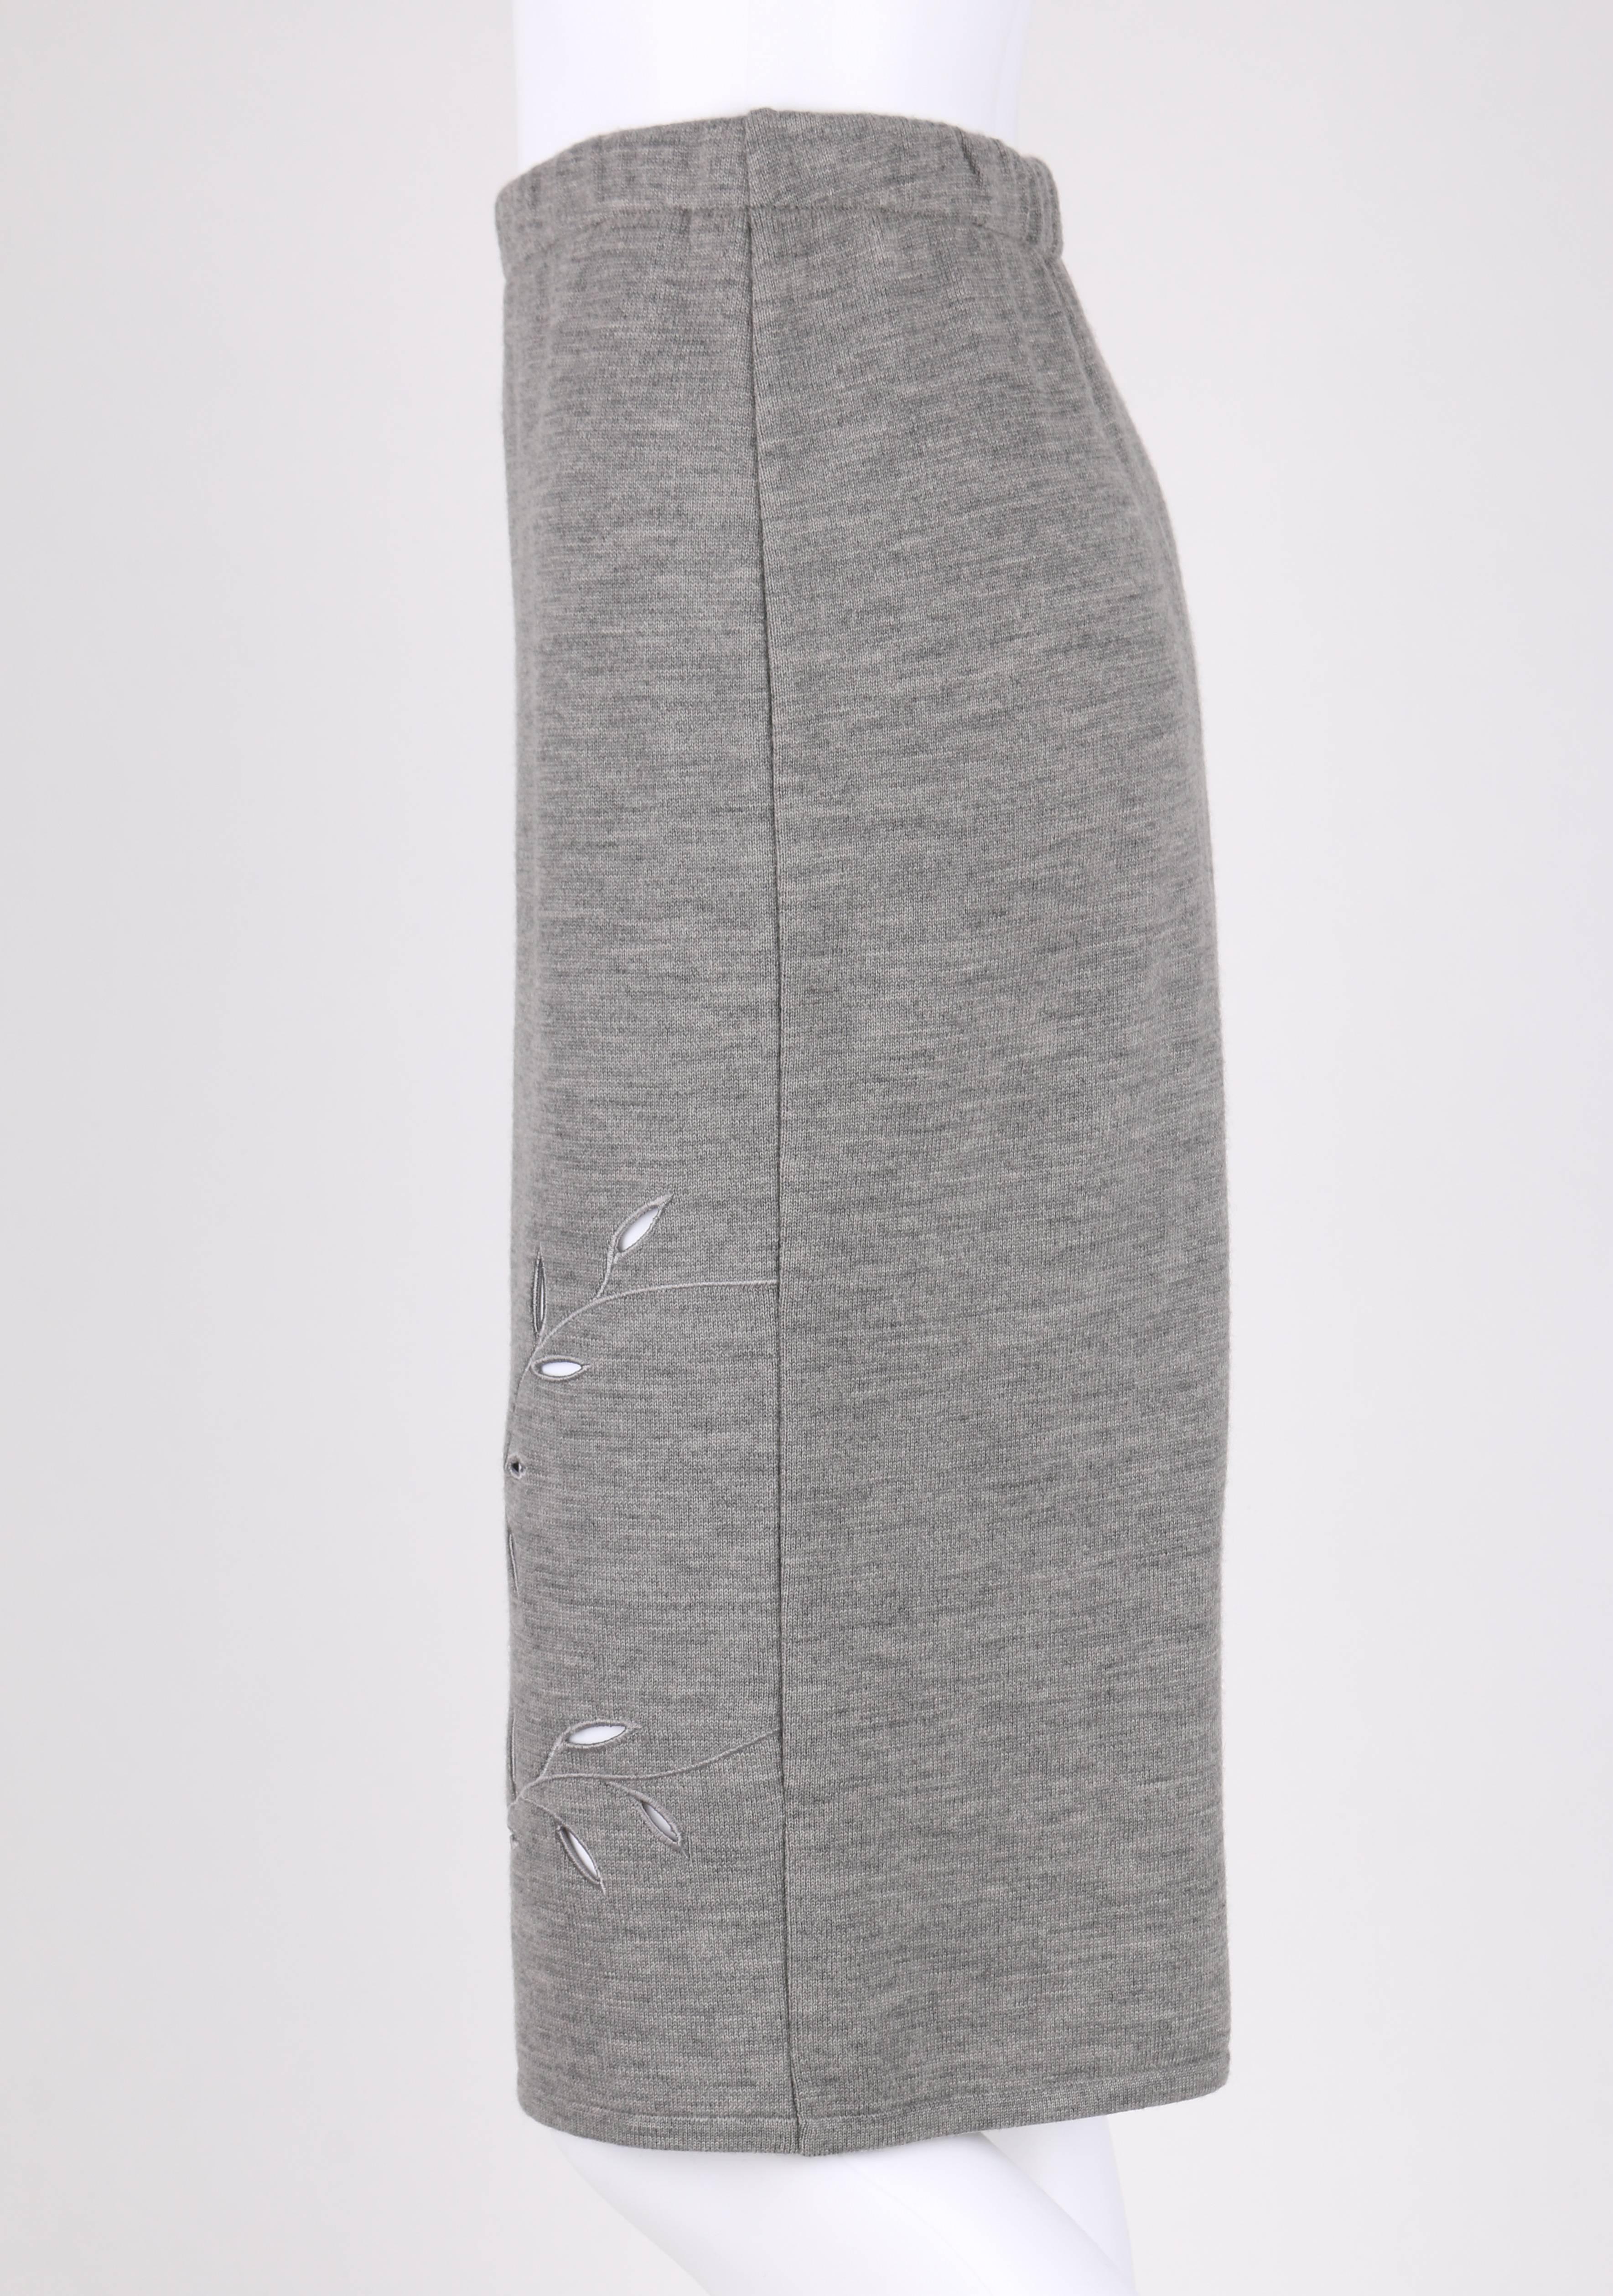 GIVENCHY COUTURE A/W 1998 ALEXANDER McQUEEN Gray Cut Work Knit Pencil Skirt 1